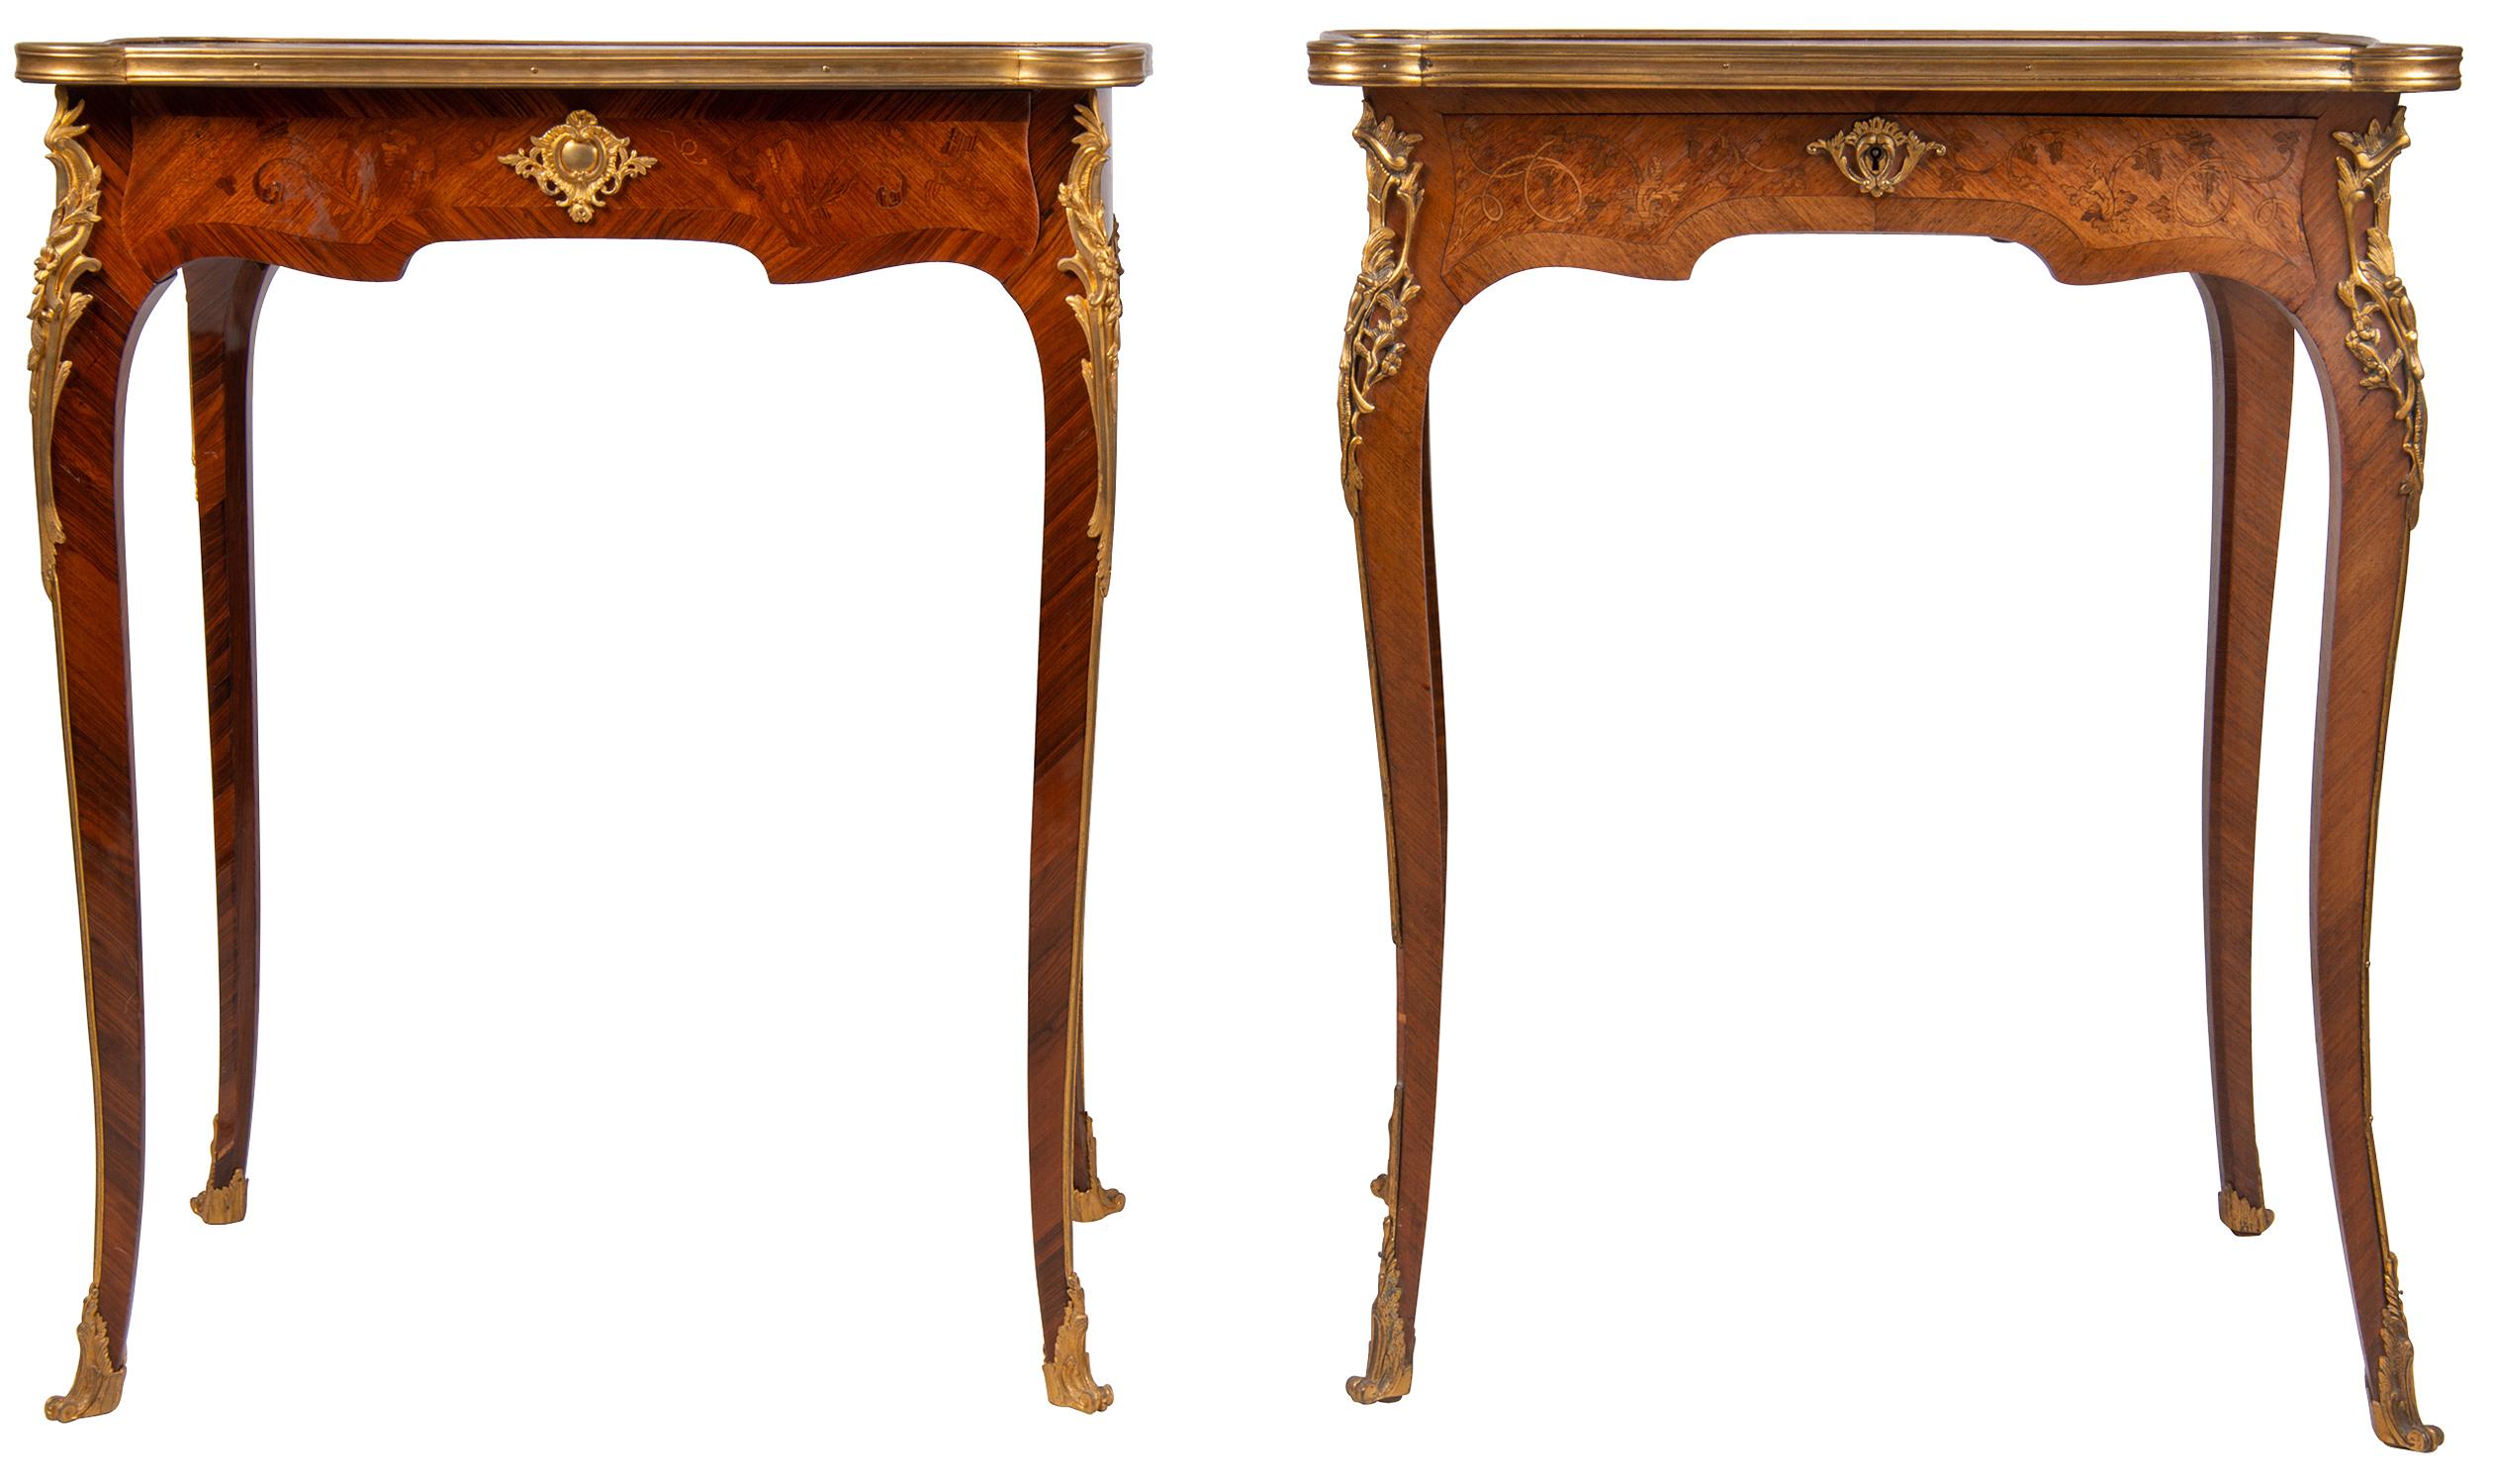 A very good quality near pair of French Louis XVI style side tables, in the manner of Francoise Linke. Each table having fine quality marquetry inlaid scrolling foliate decoration, a single frieze drawer and raised on elegant cabriole legs with